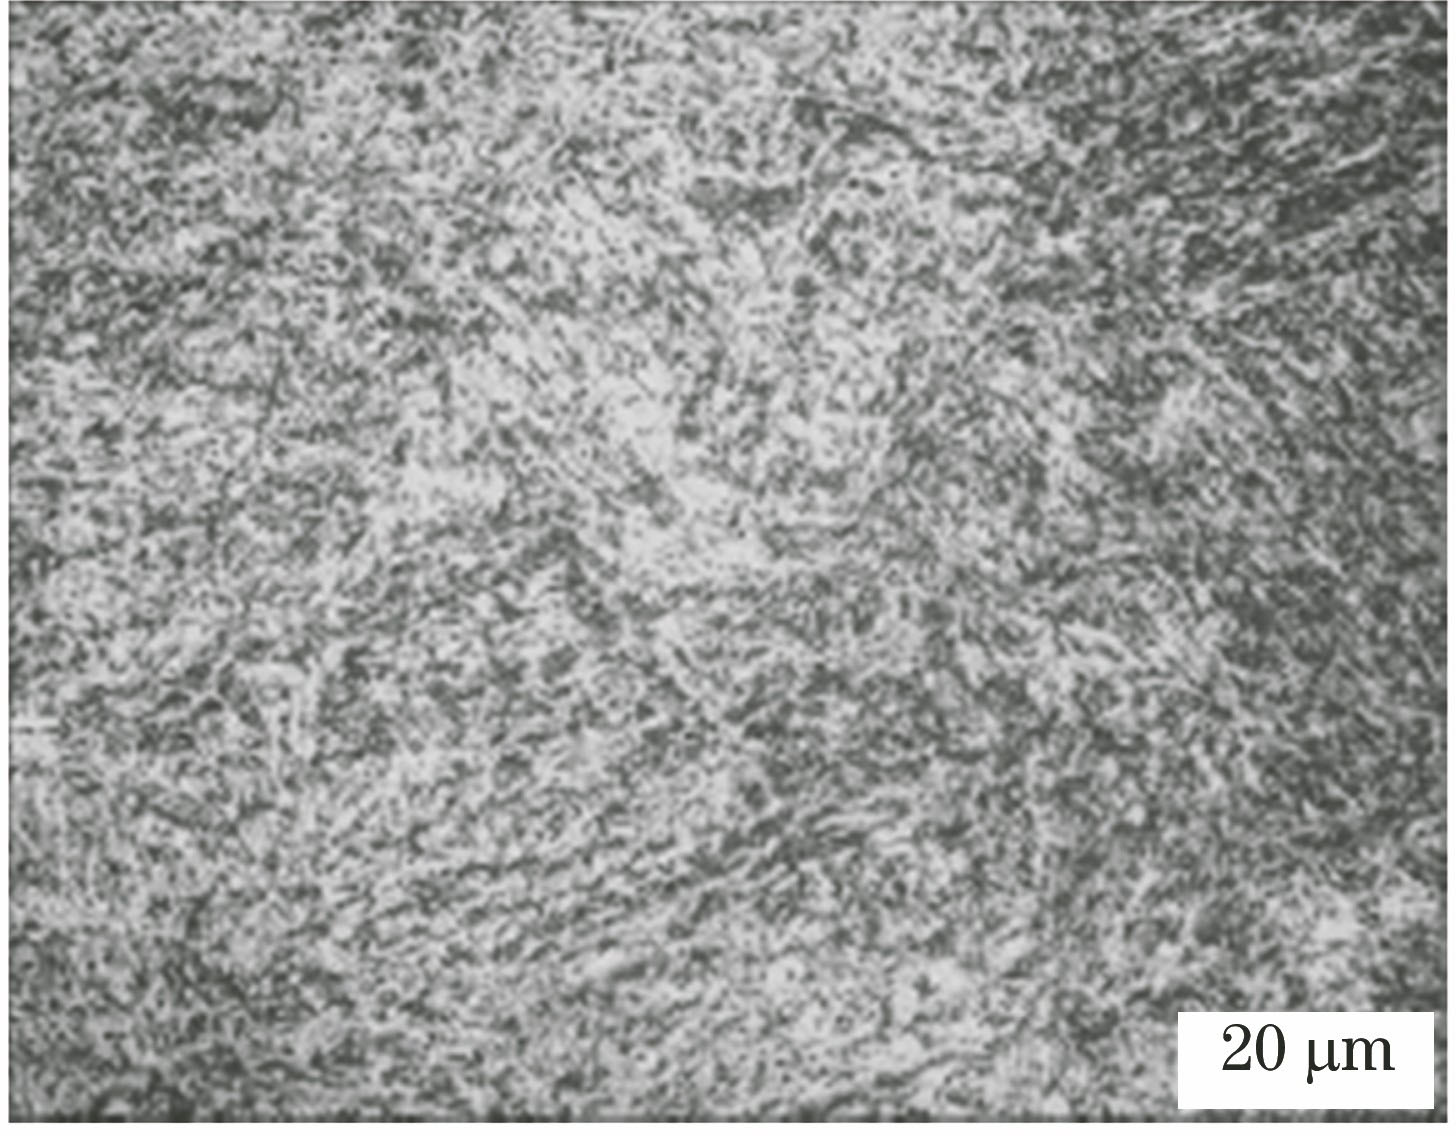 Microstructure of 300M steel used in test